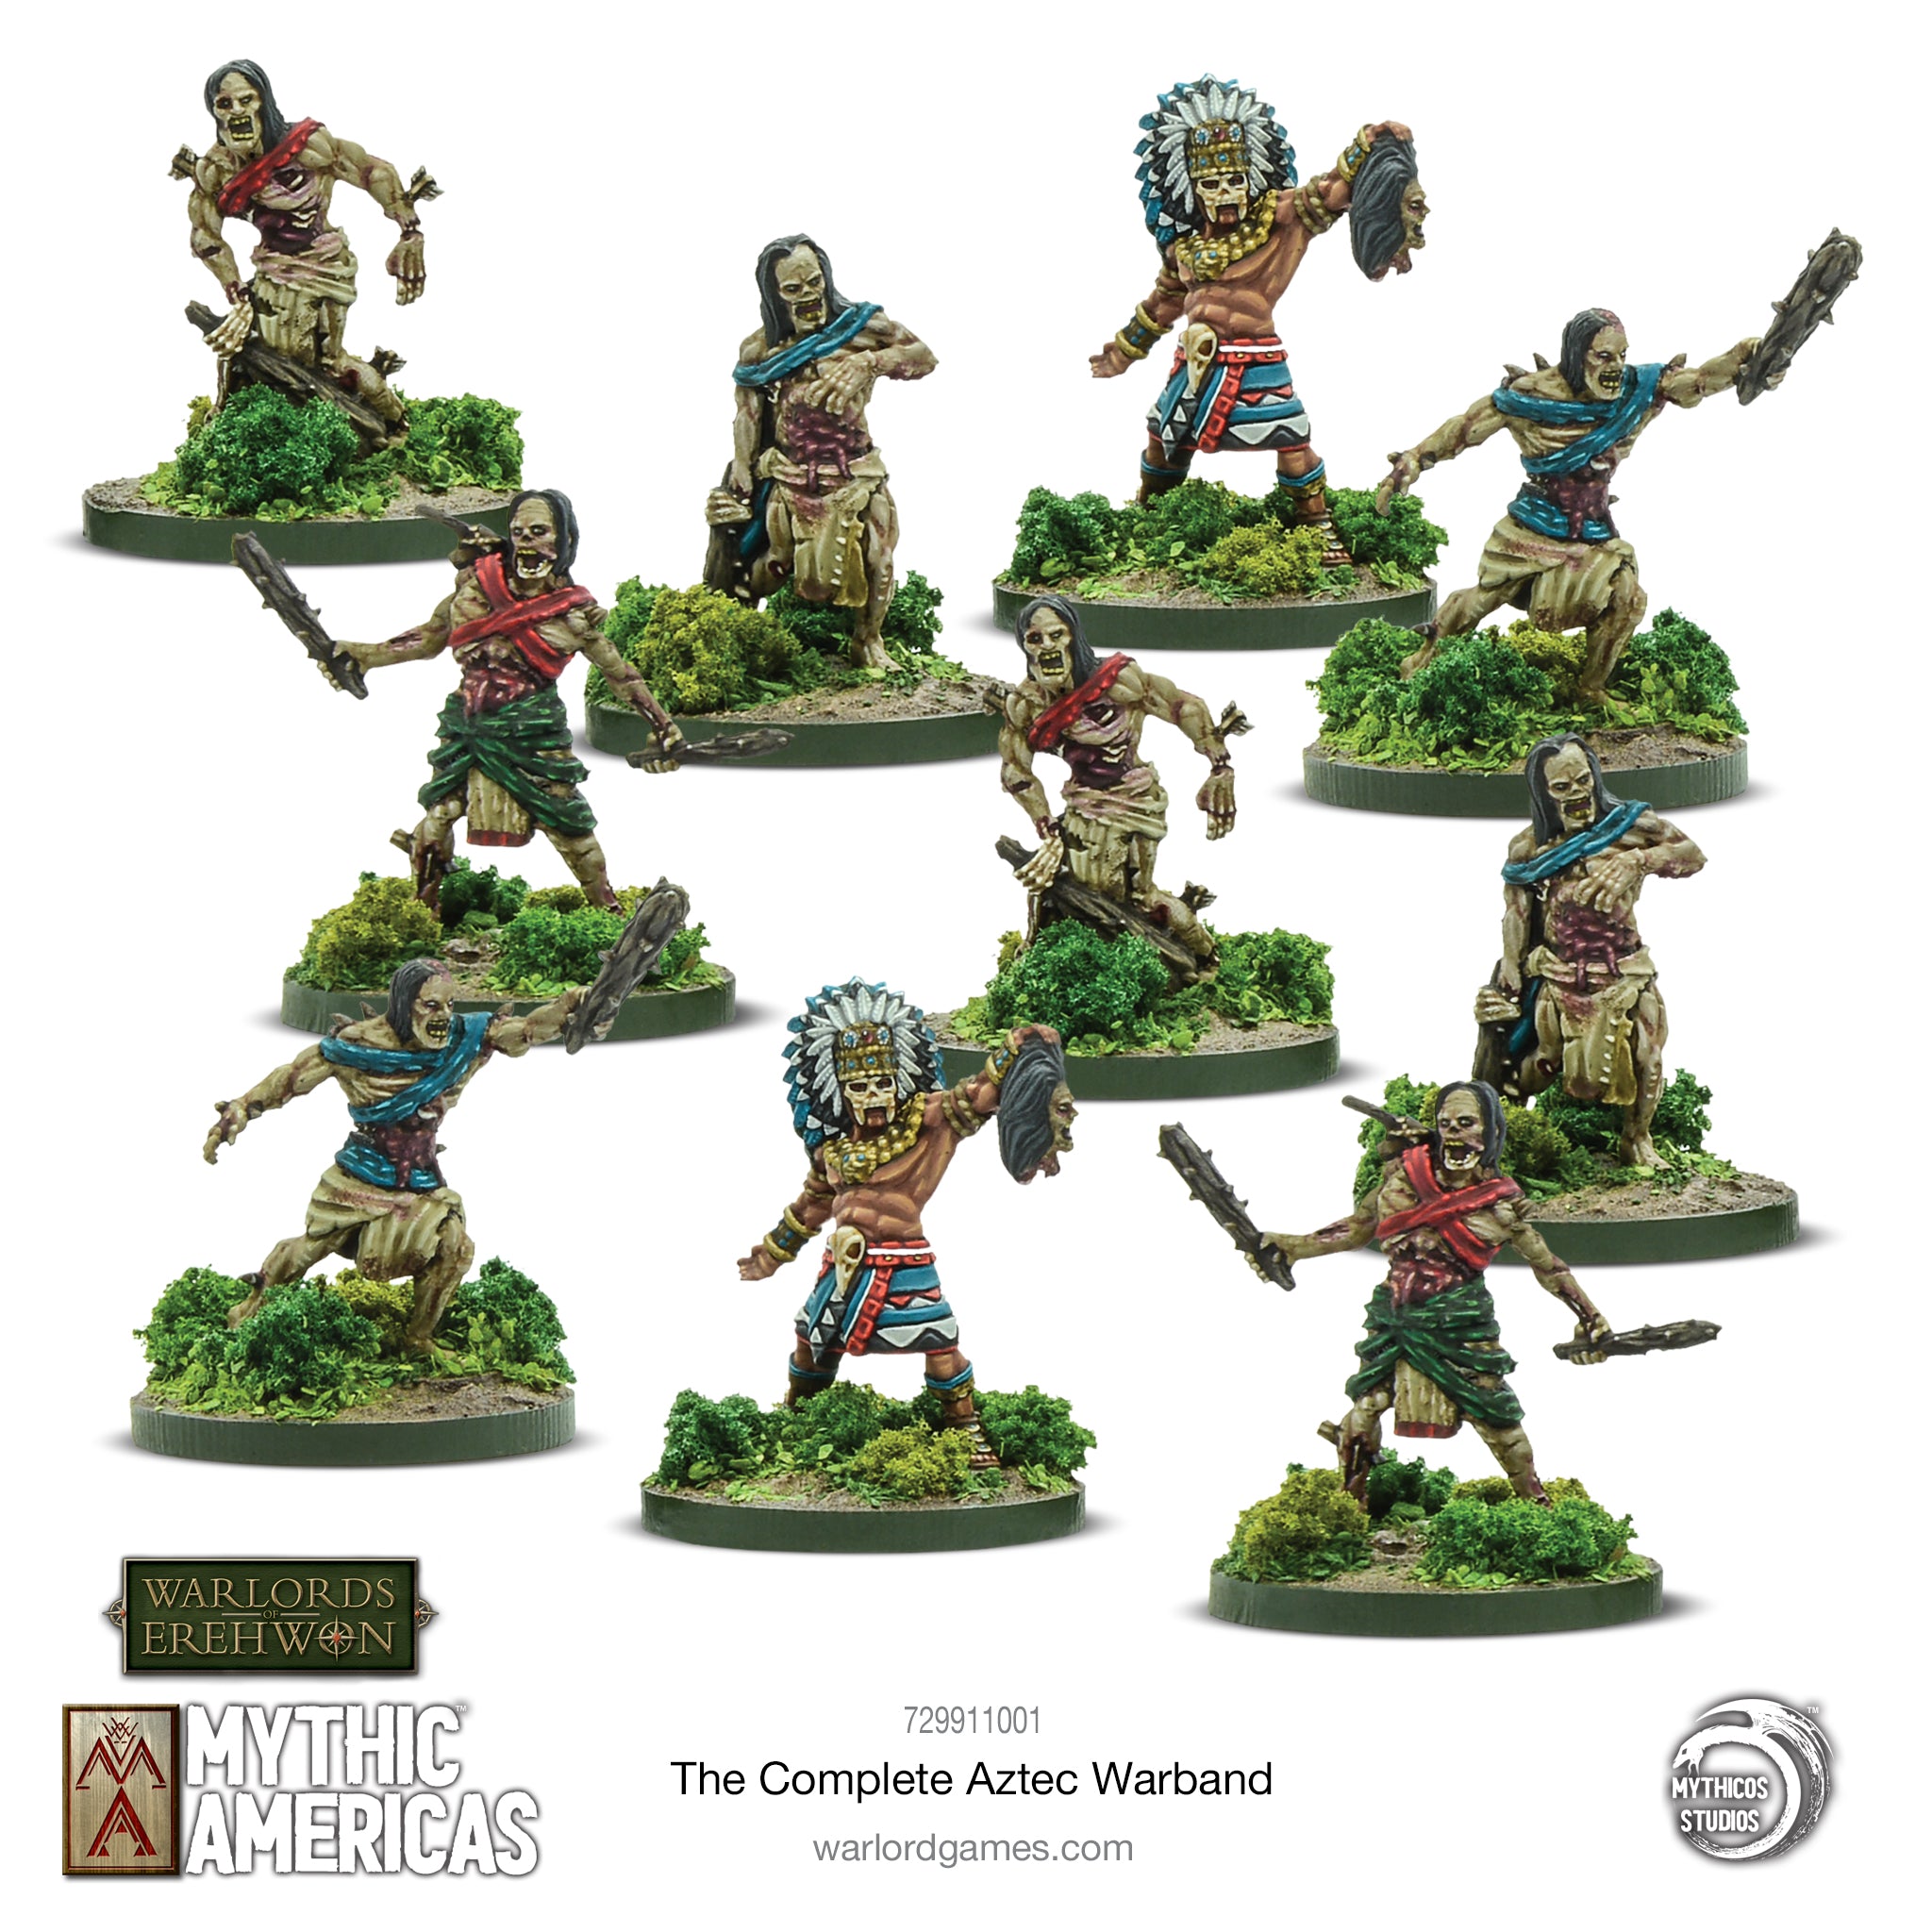 The Complete Aztec Warband